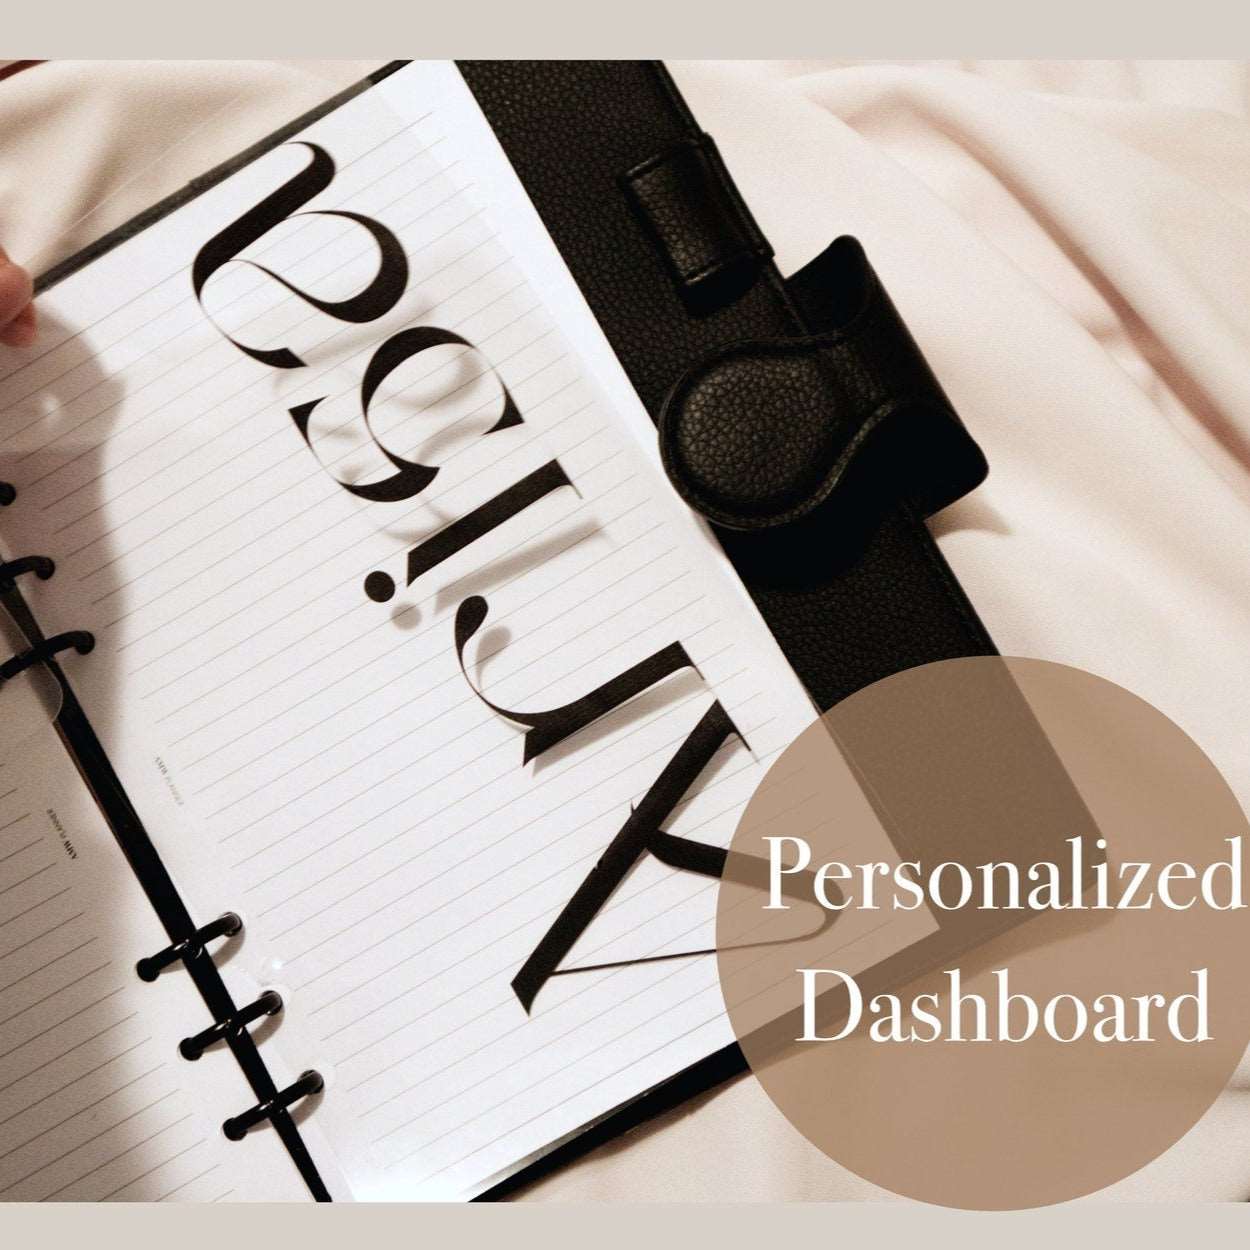 Personalized Dashboard | Large text